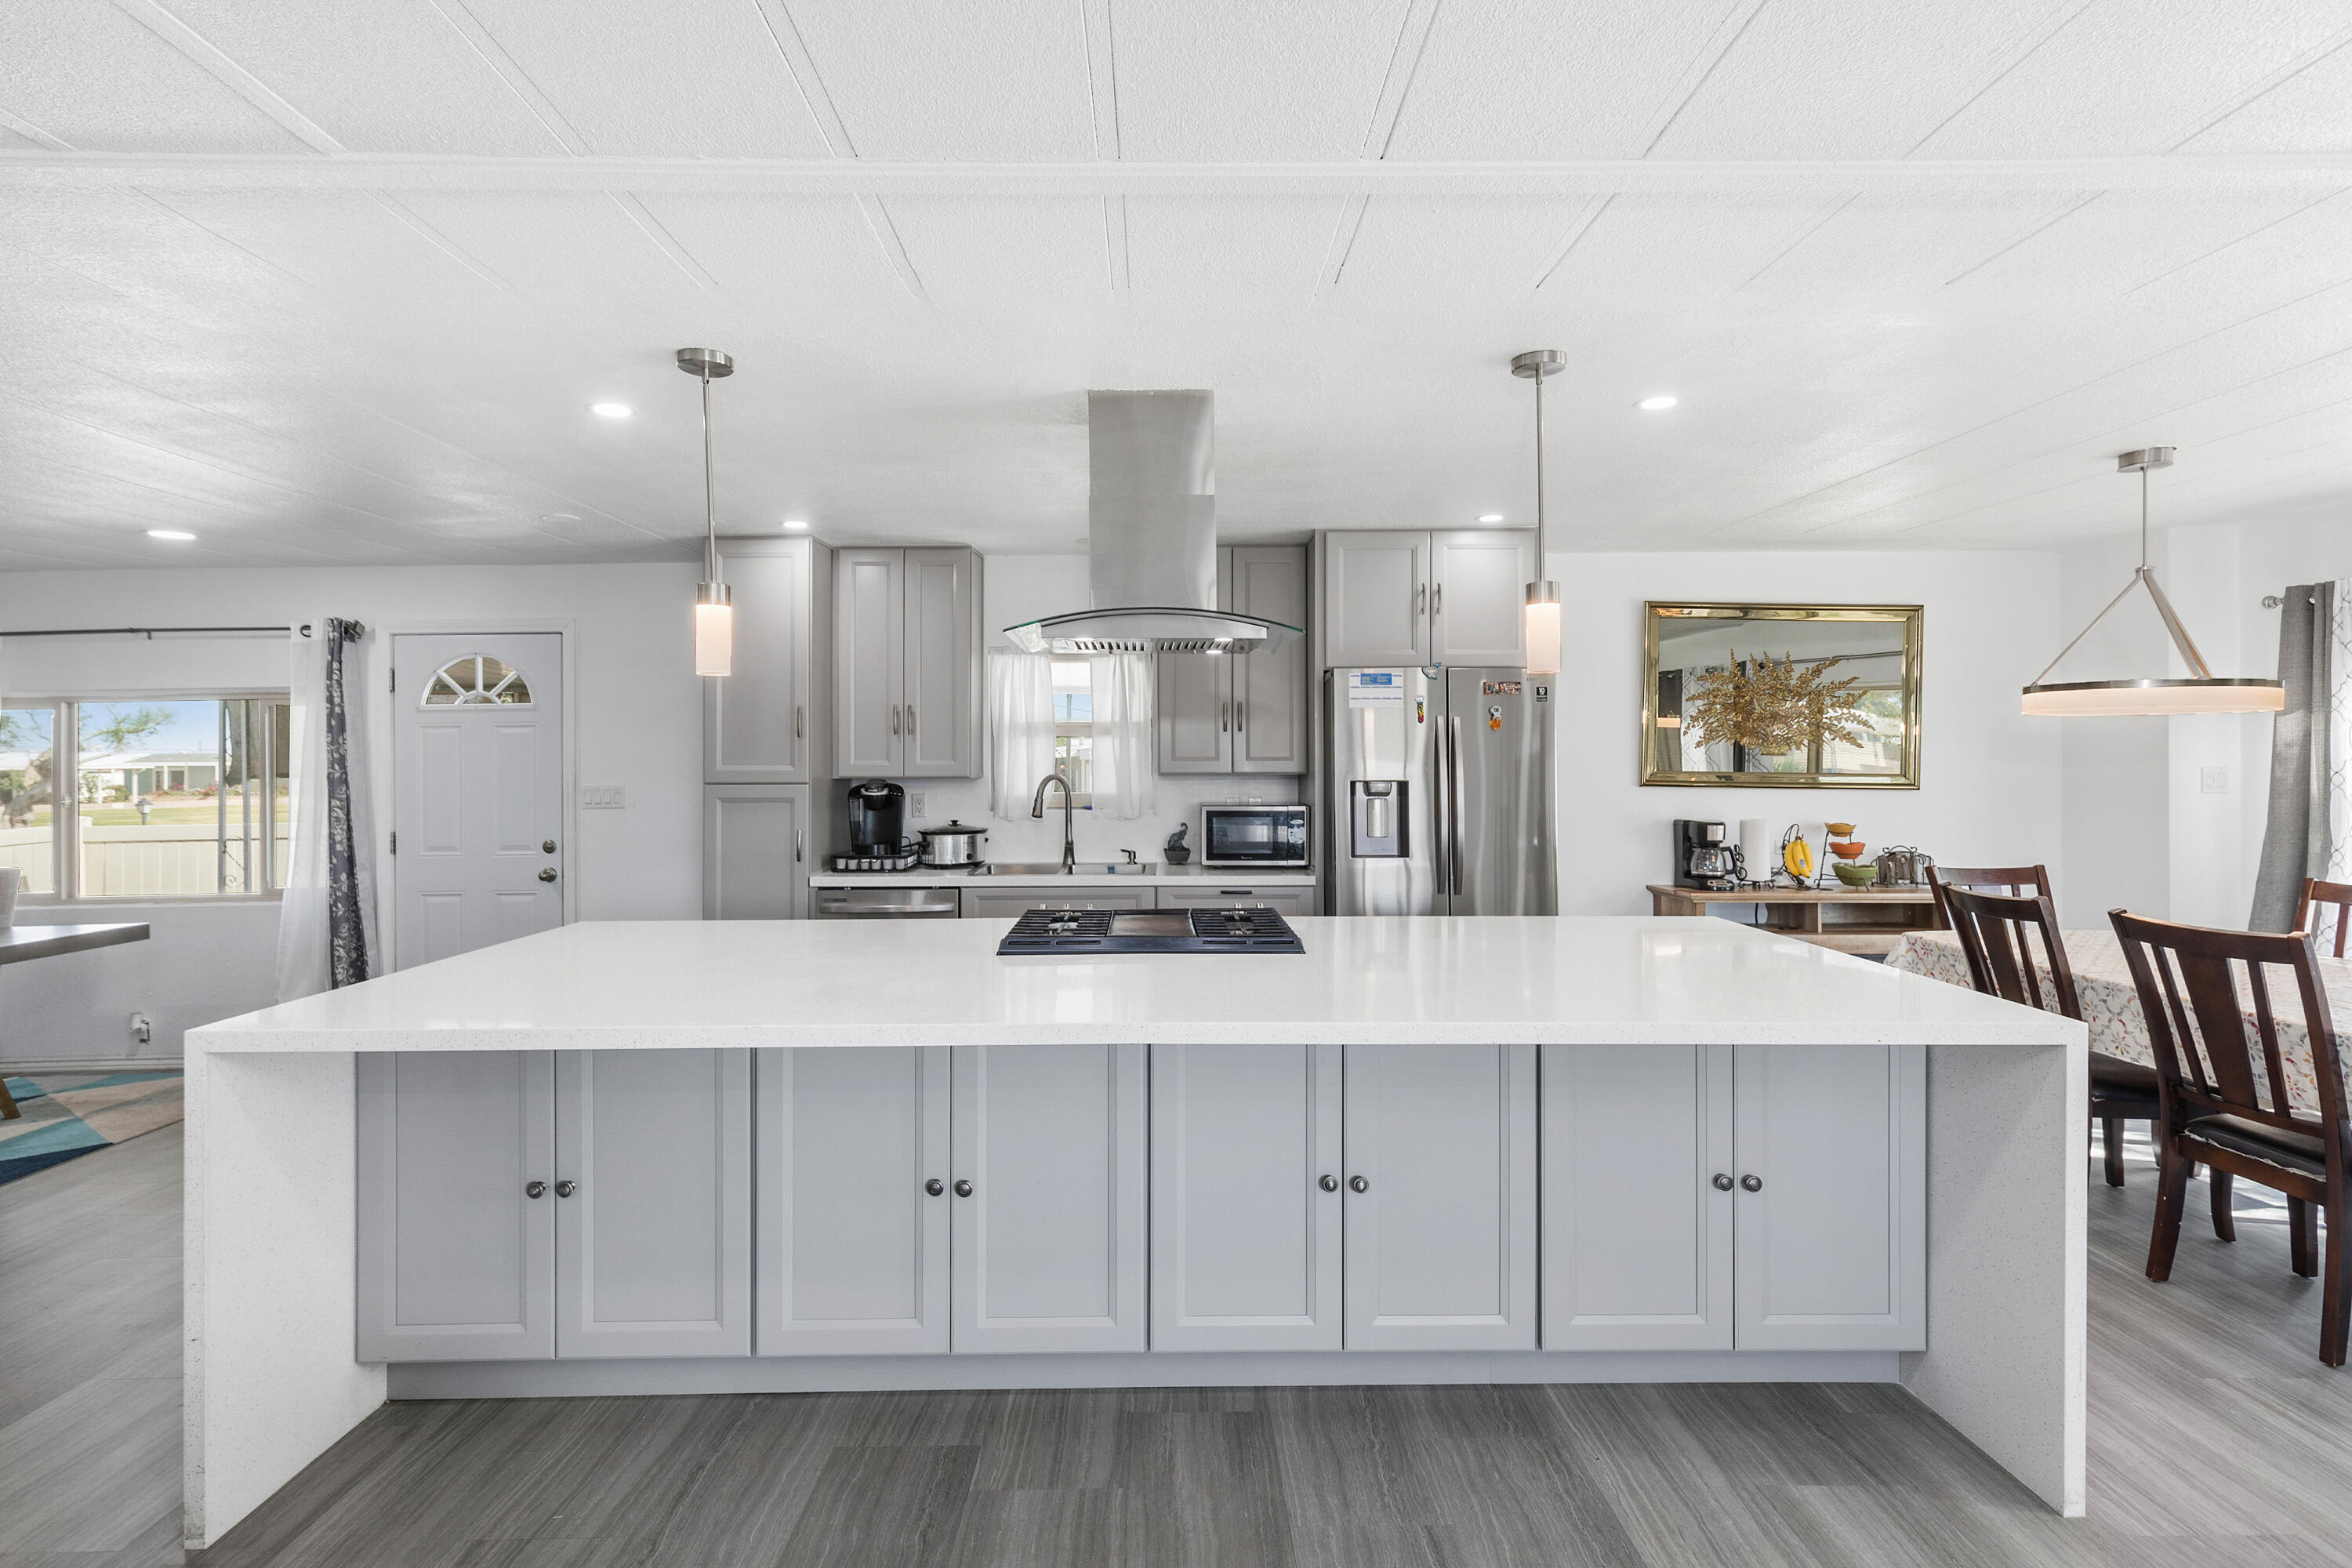 a large white kitchen with wooden floors stainless steel appliances and cabinets